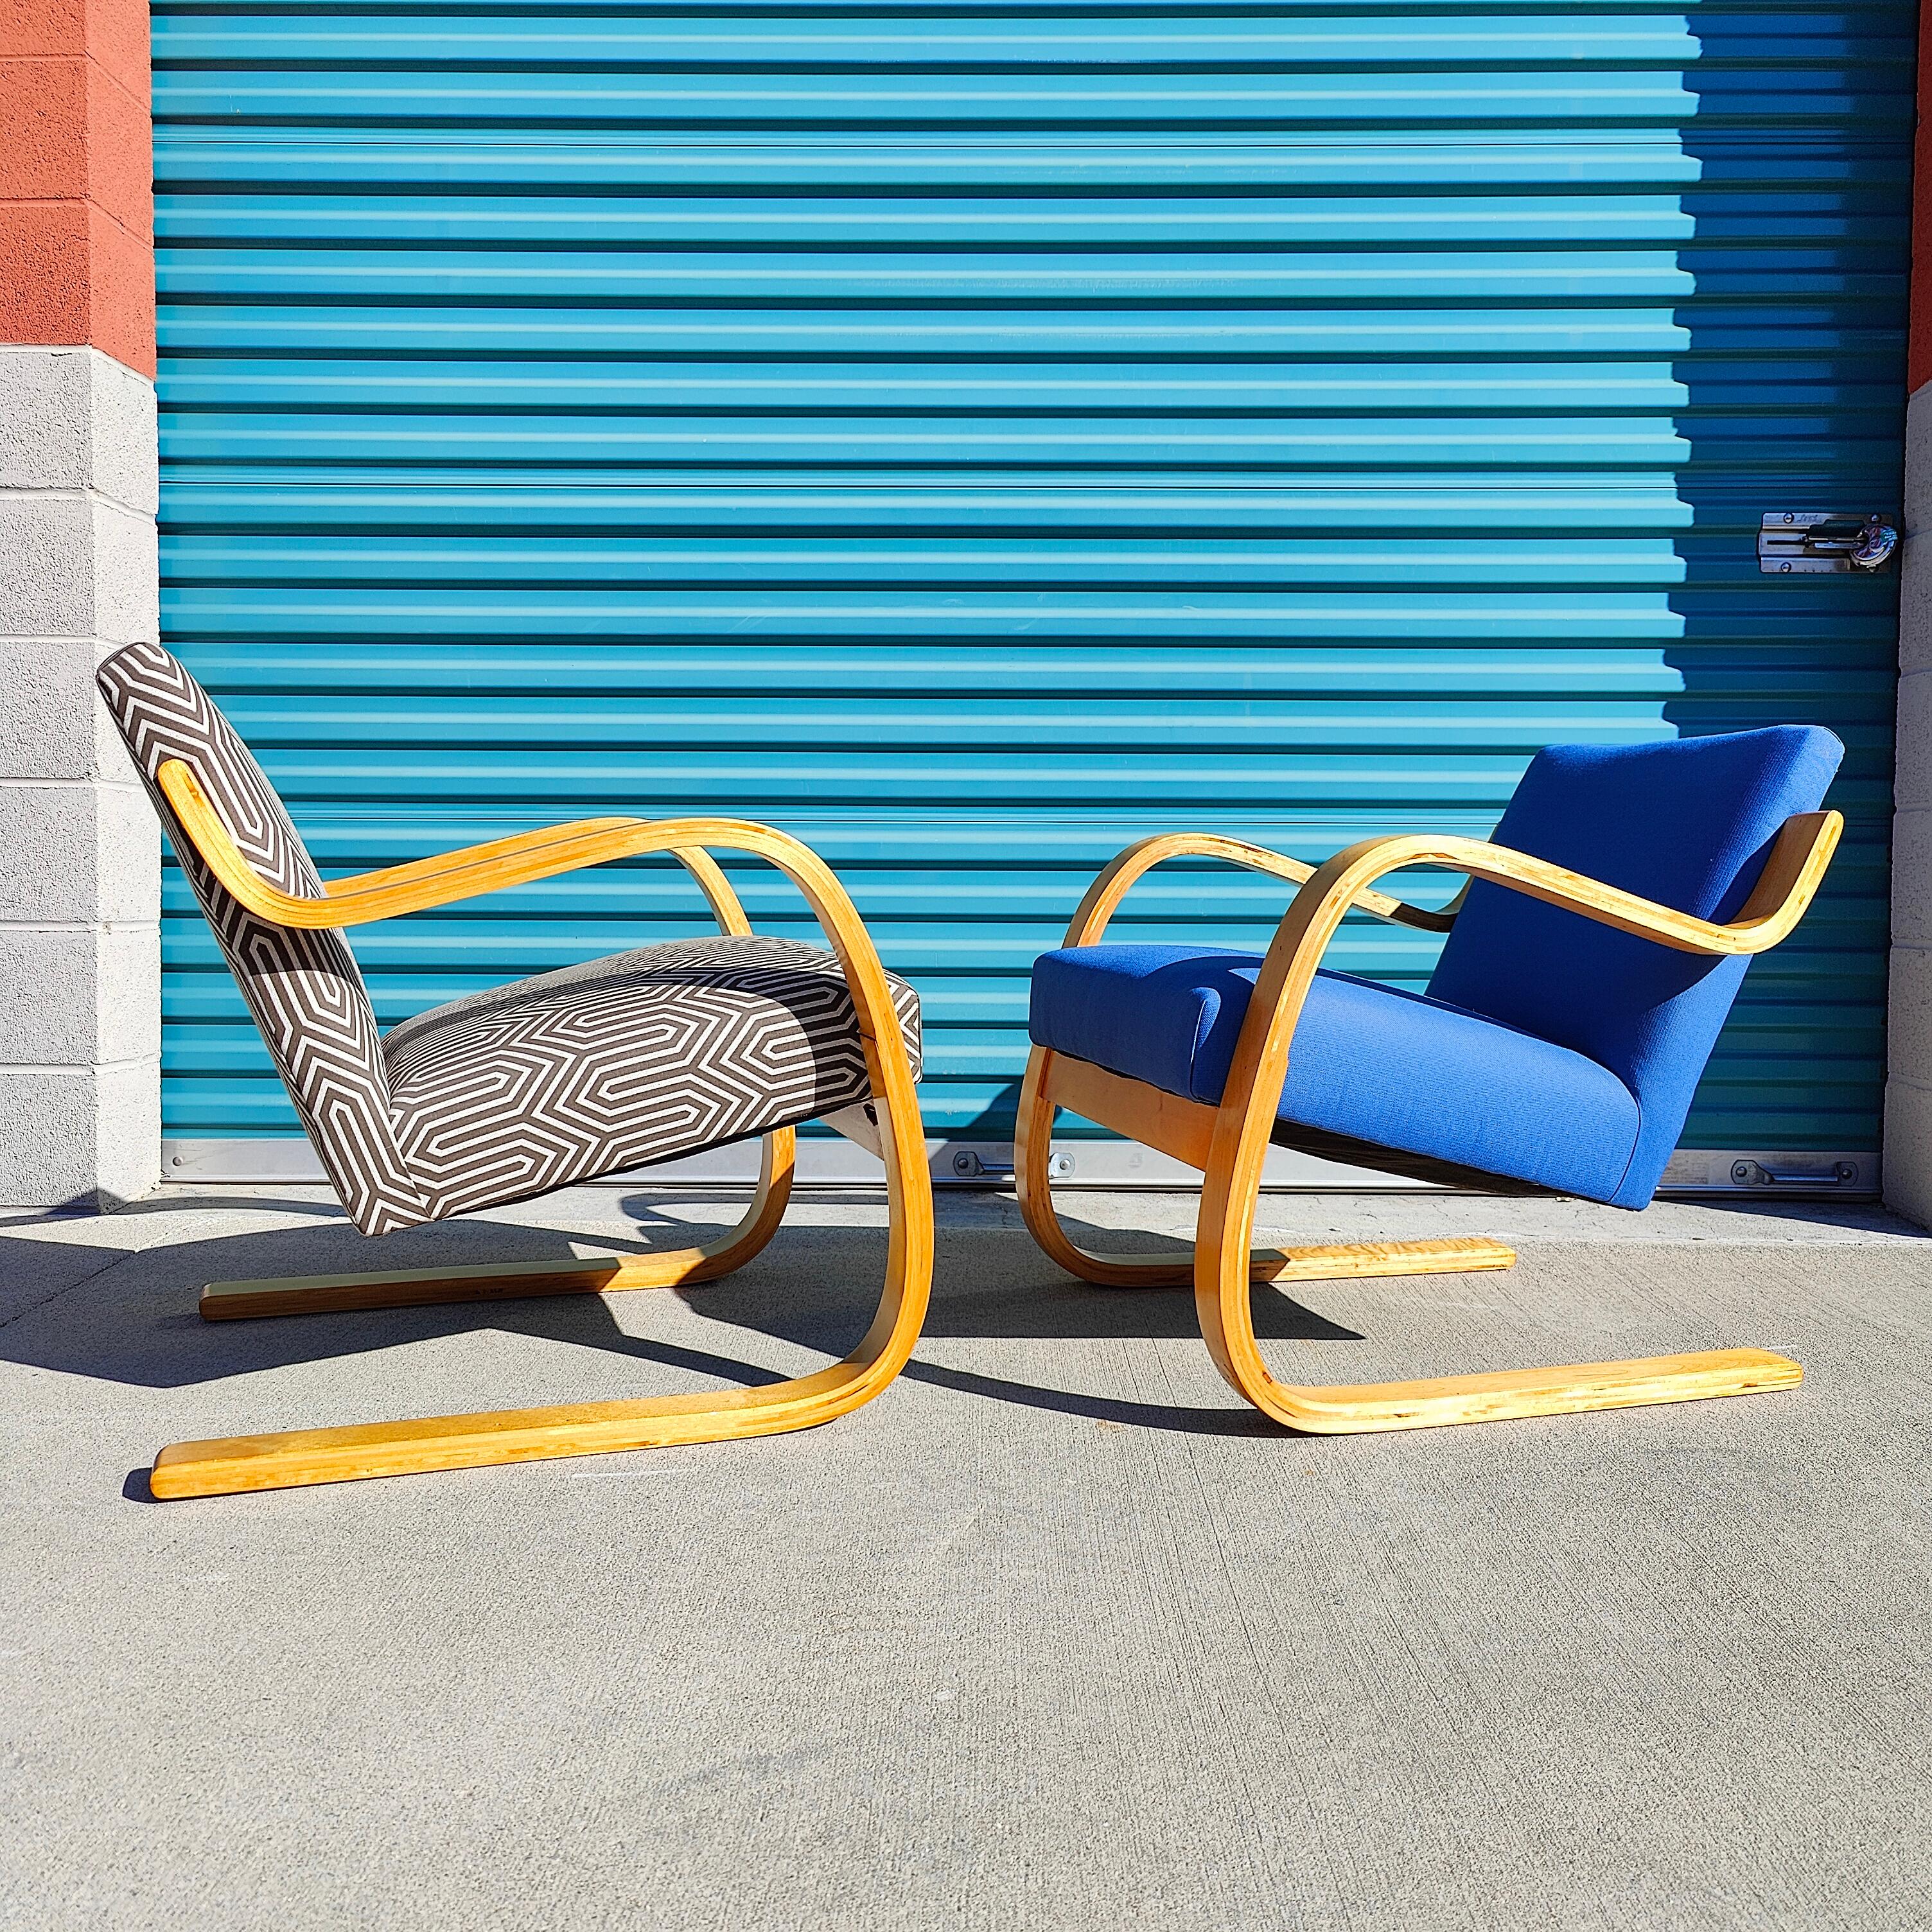 Now available is a pair of Alvar Aalto cantilever lounge chairs model 402 for Artek. These chairs feature birch bentwood frames that have been reupholstered at one point in their lives. Frames are in great unrestored condition. Each chair measures